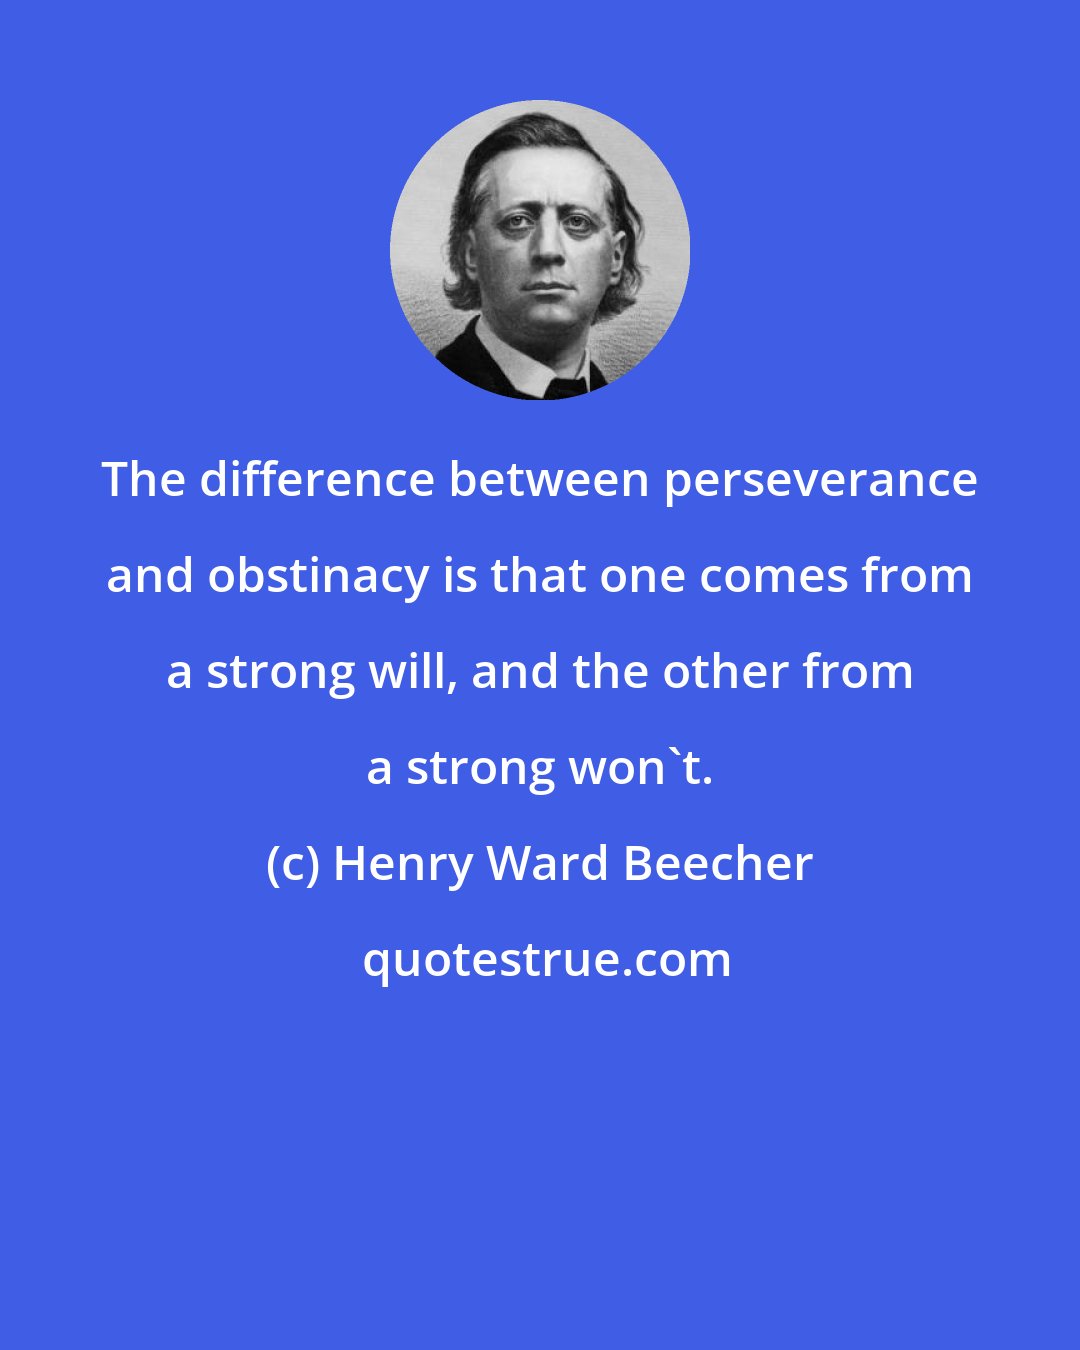 Henry Ward Beecher: The difference between perseverance and obstinacy is that one comes from a strong will, and the other from a strong won't.